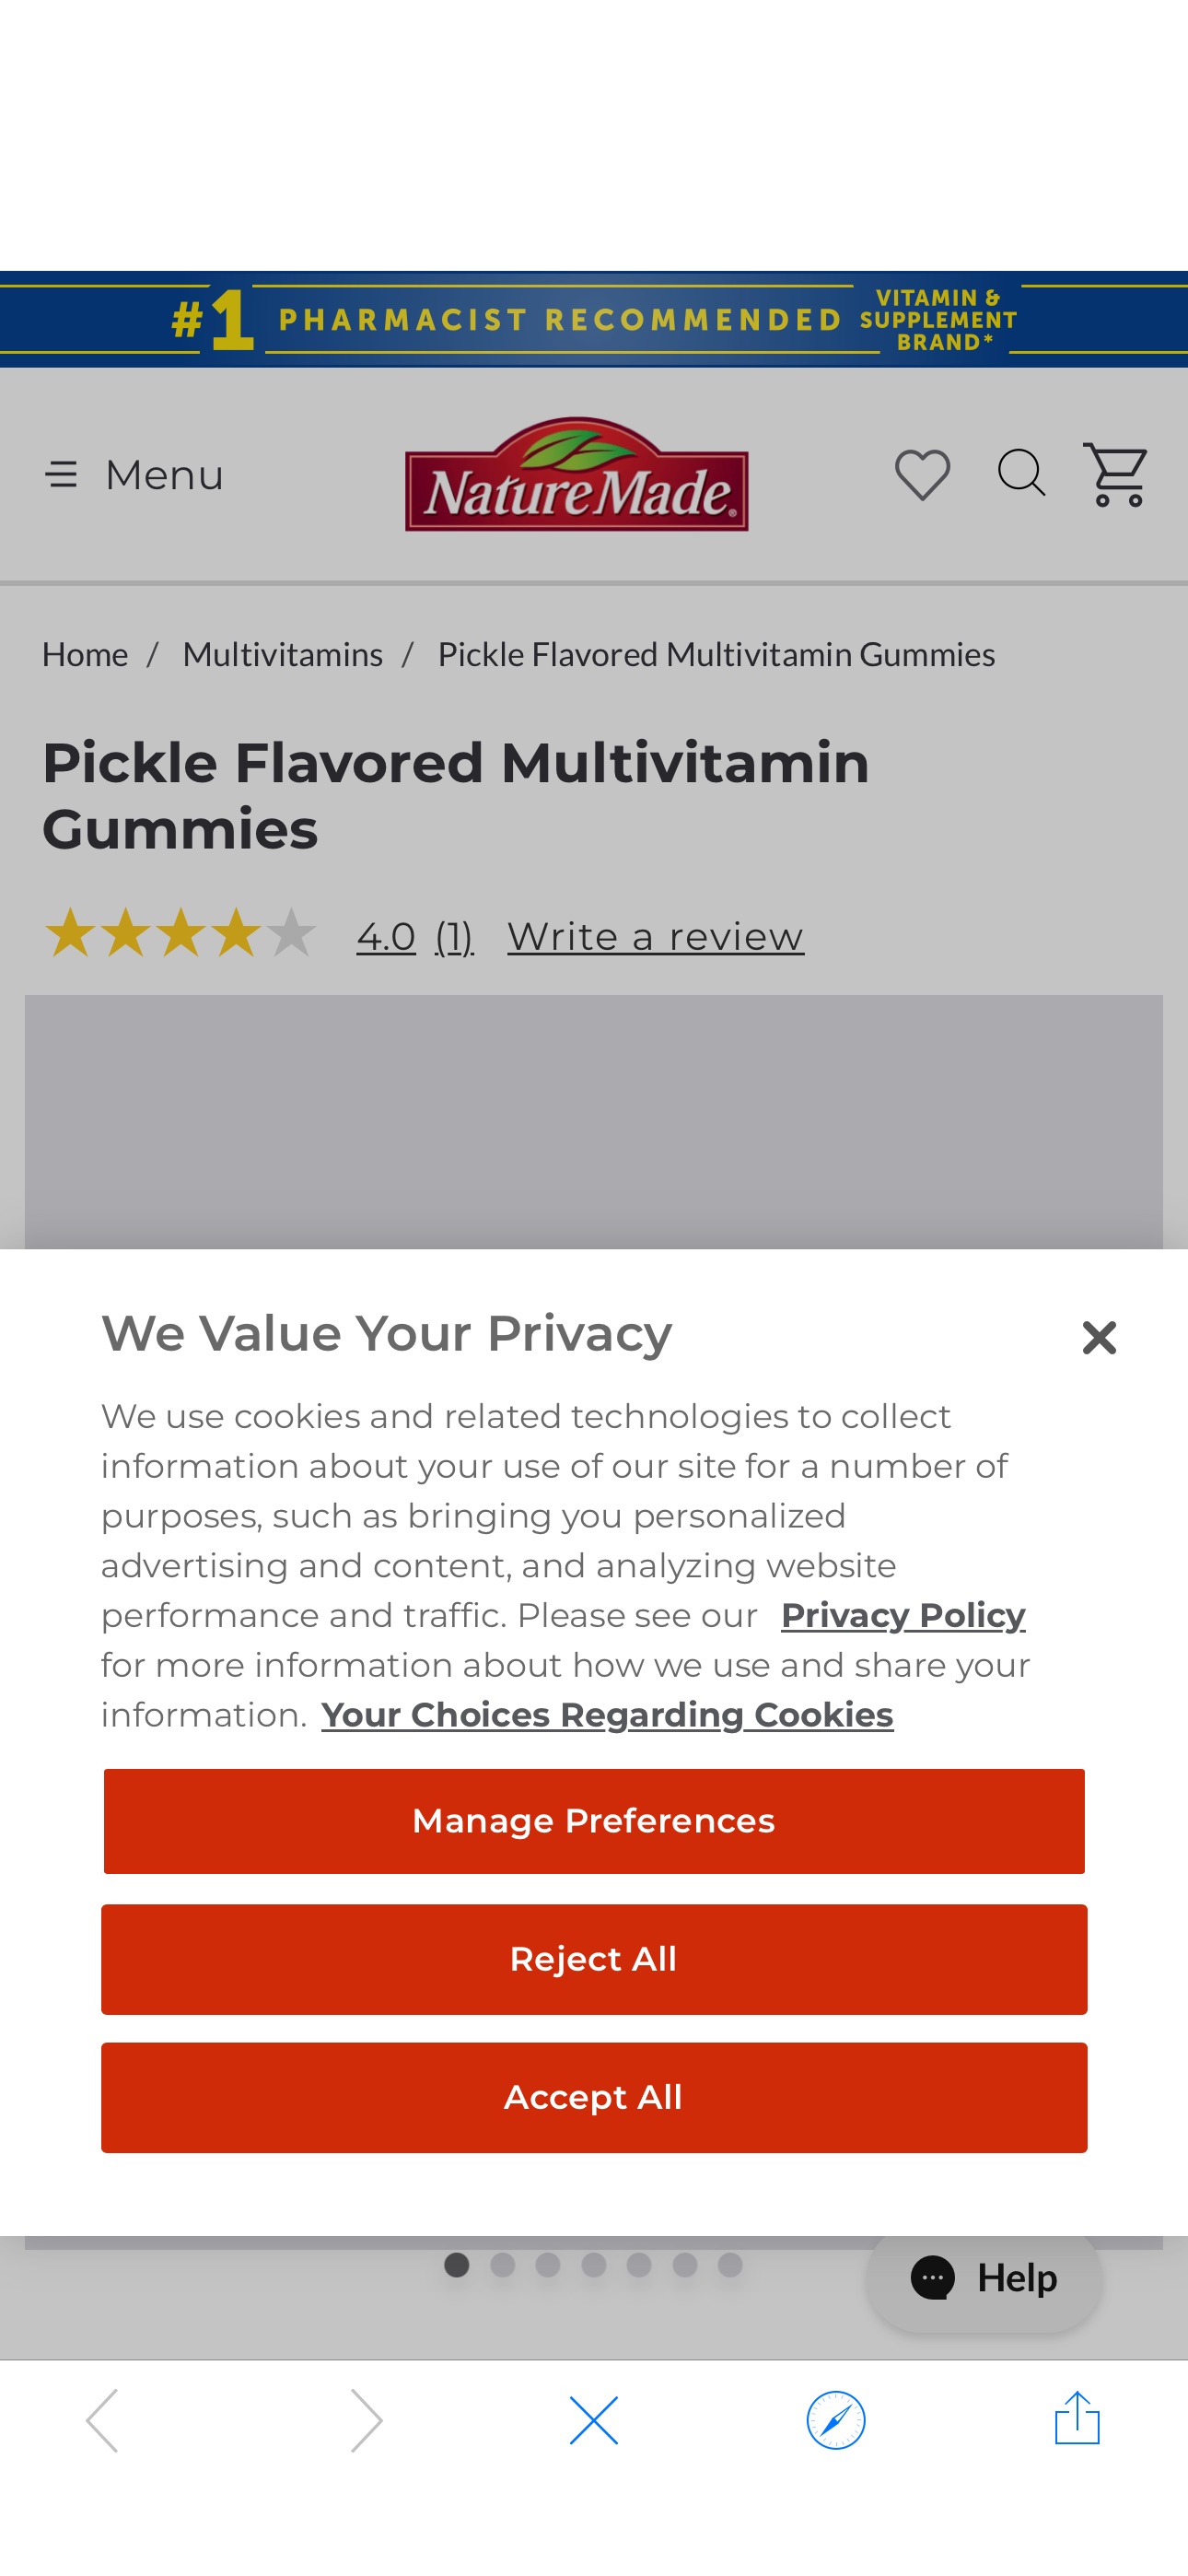 Pickle Flavored Multivitamin Gummies | Nature Made®Tomorrow at 12pm Est, 11am Central, 9am Pacific, 10am Mountain time NatureMade will be giving out Free Multi Vitamin Gummies FREE 
While Supplies Las